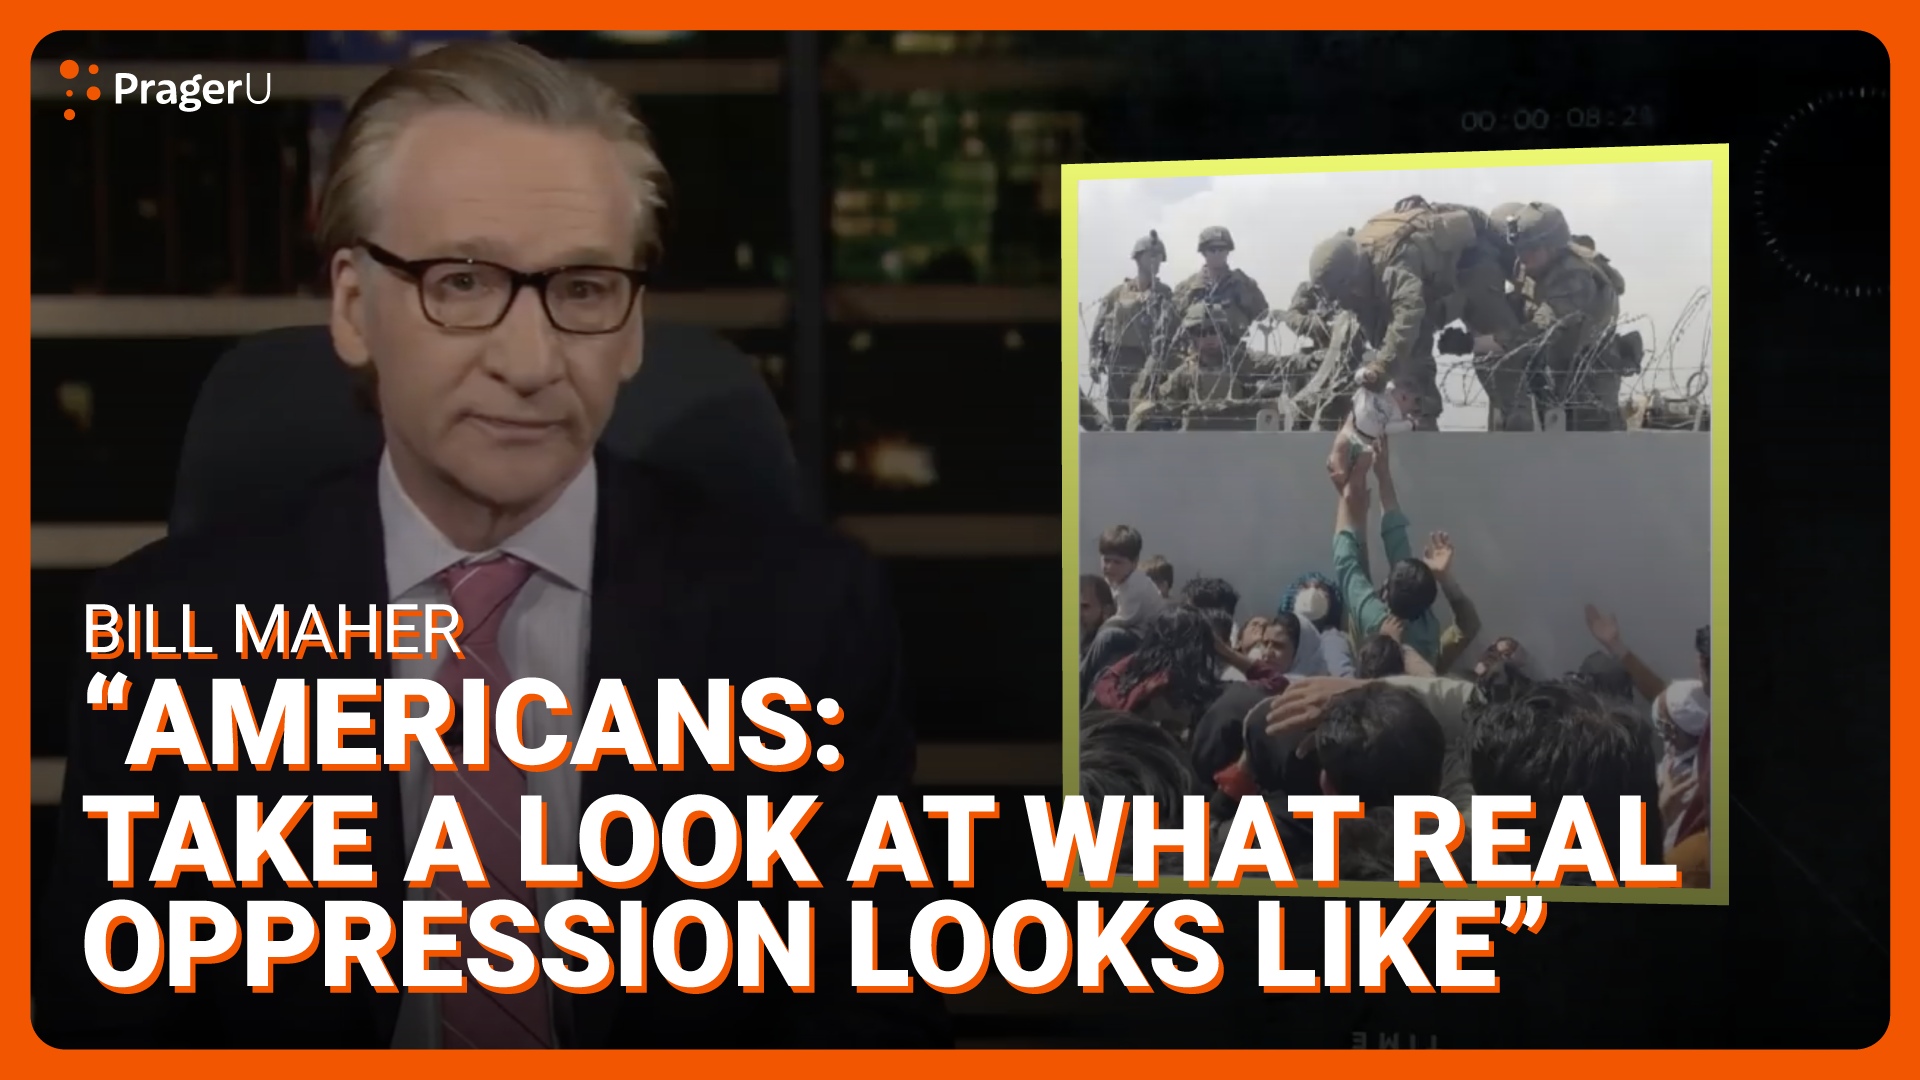 Bill Maher: Americans Take A Look At What Real Oppression Looks Like